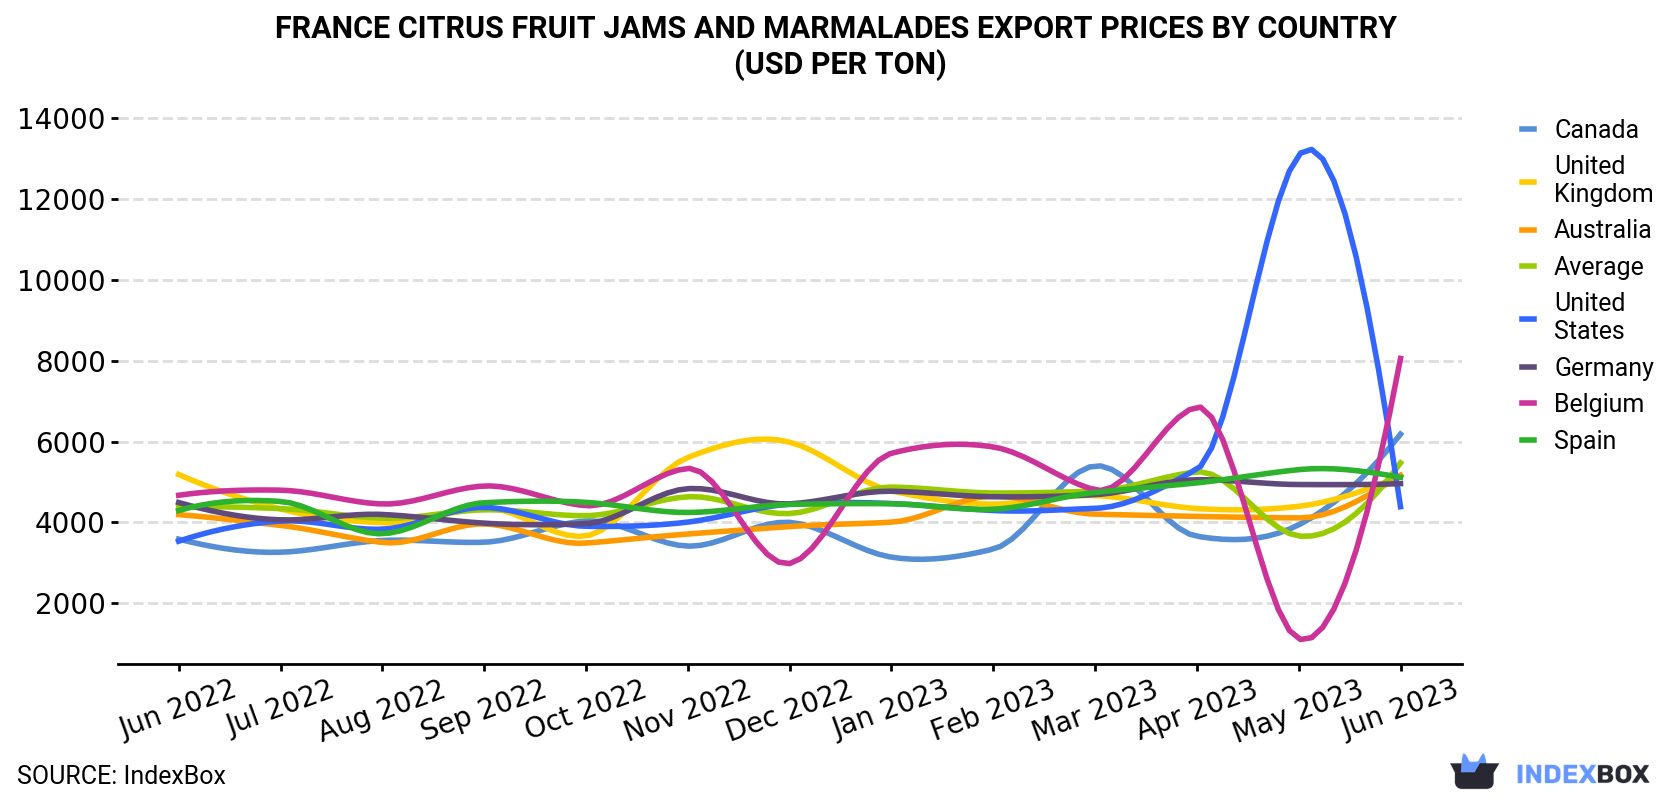 France Citrus Fruit Jams and Marmalades Export Prices By Country (USD Per Ton)